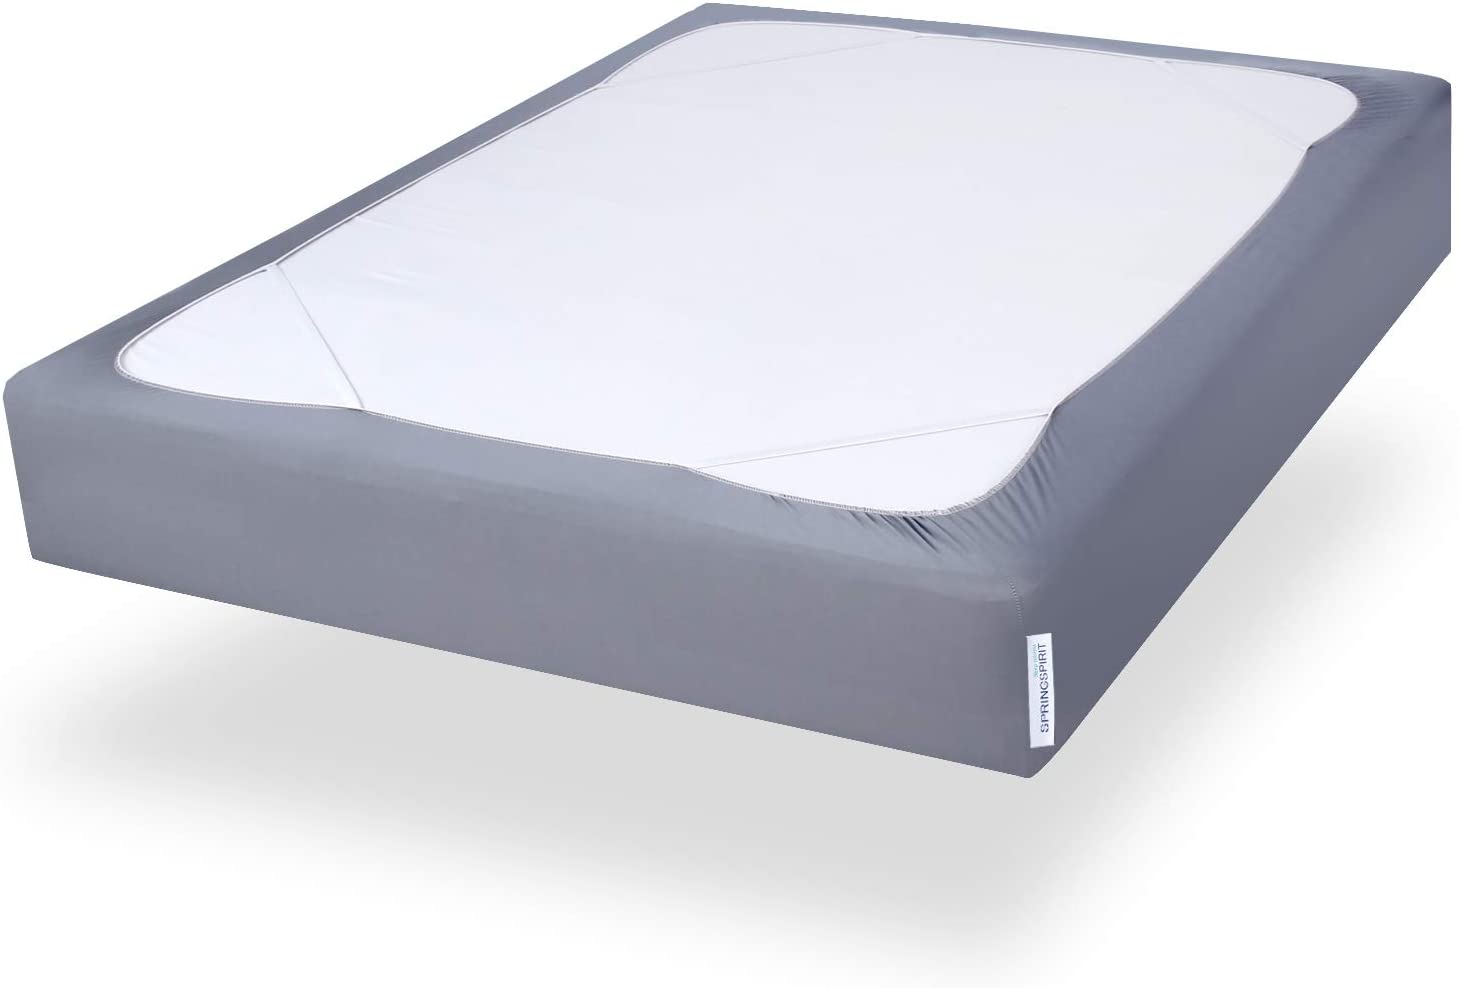 Box Spring Cover with Smooth and Elastic Woven Material, Wrinkle & Fading Resistant & Dustproof, Grey - Biloban Online Store